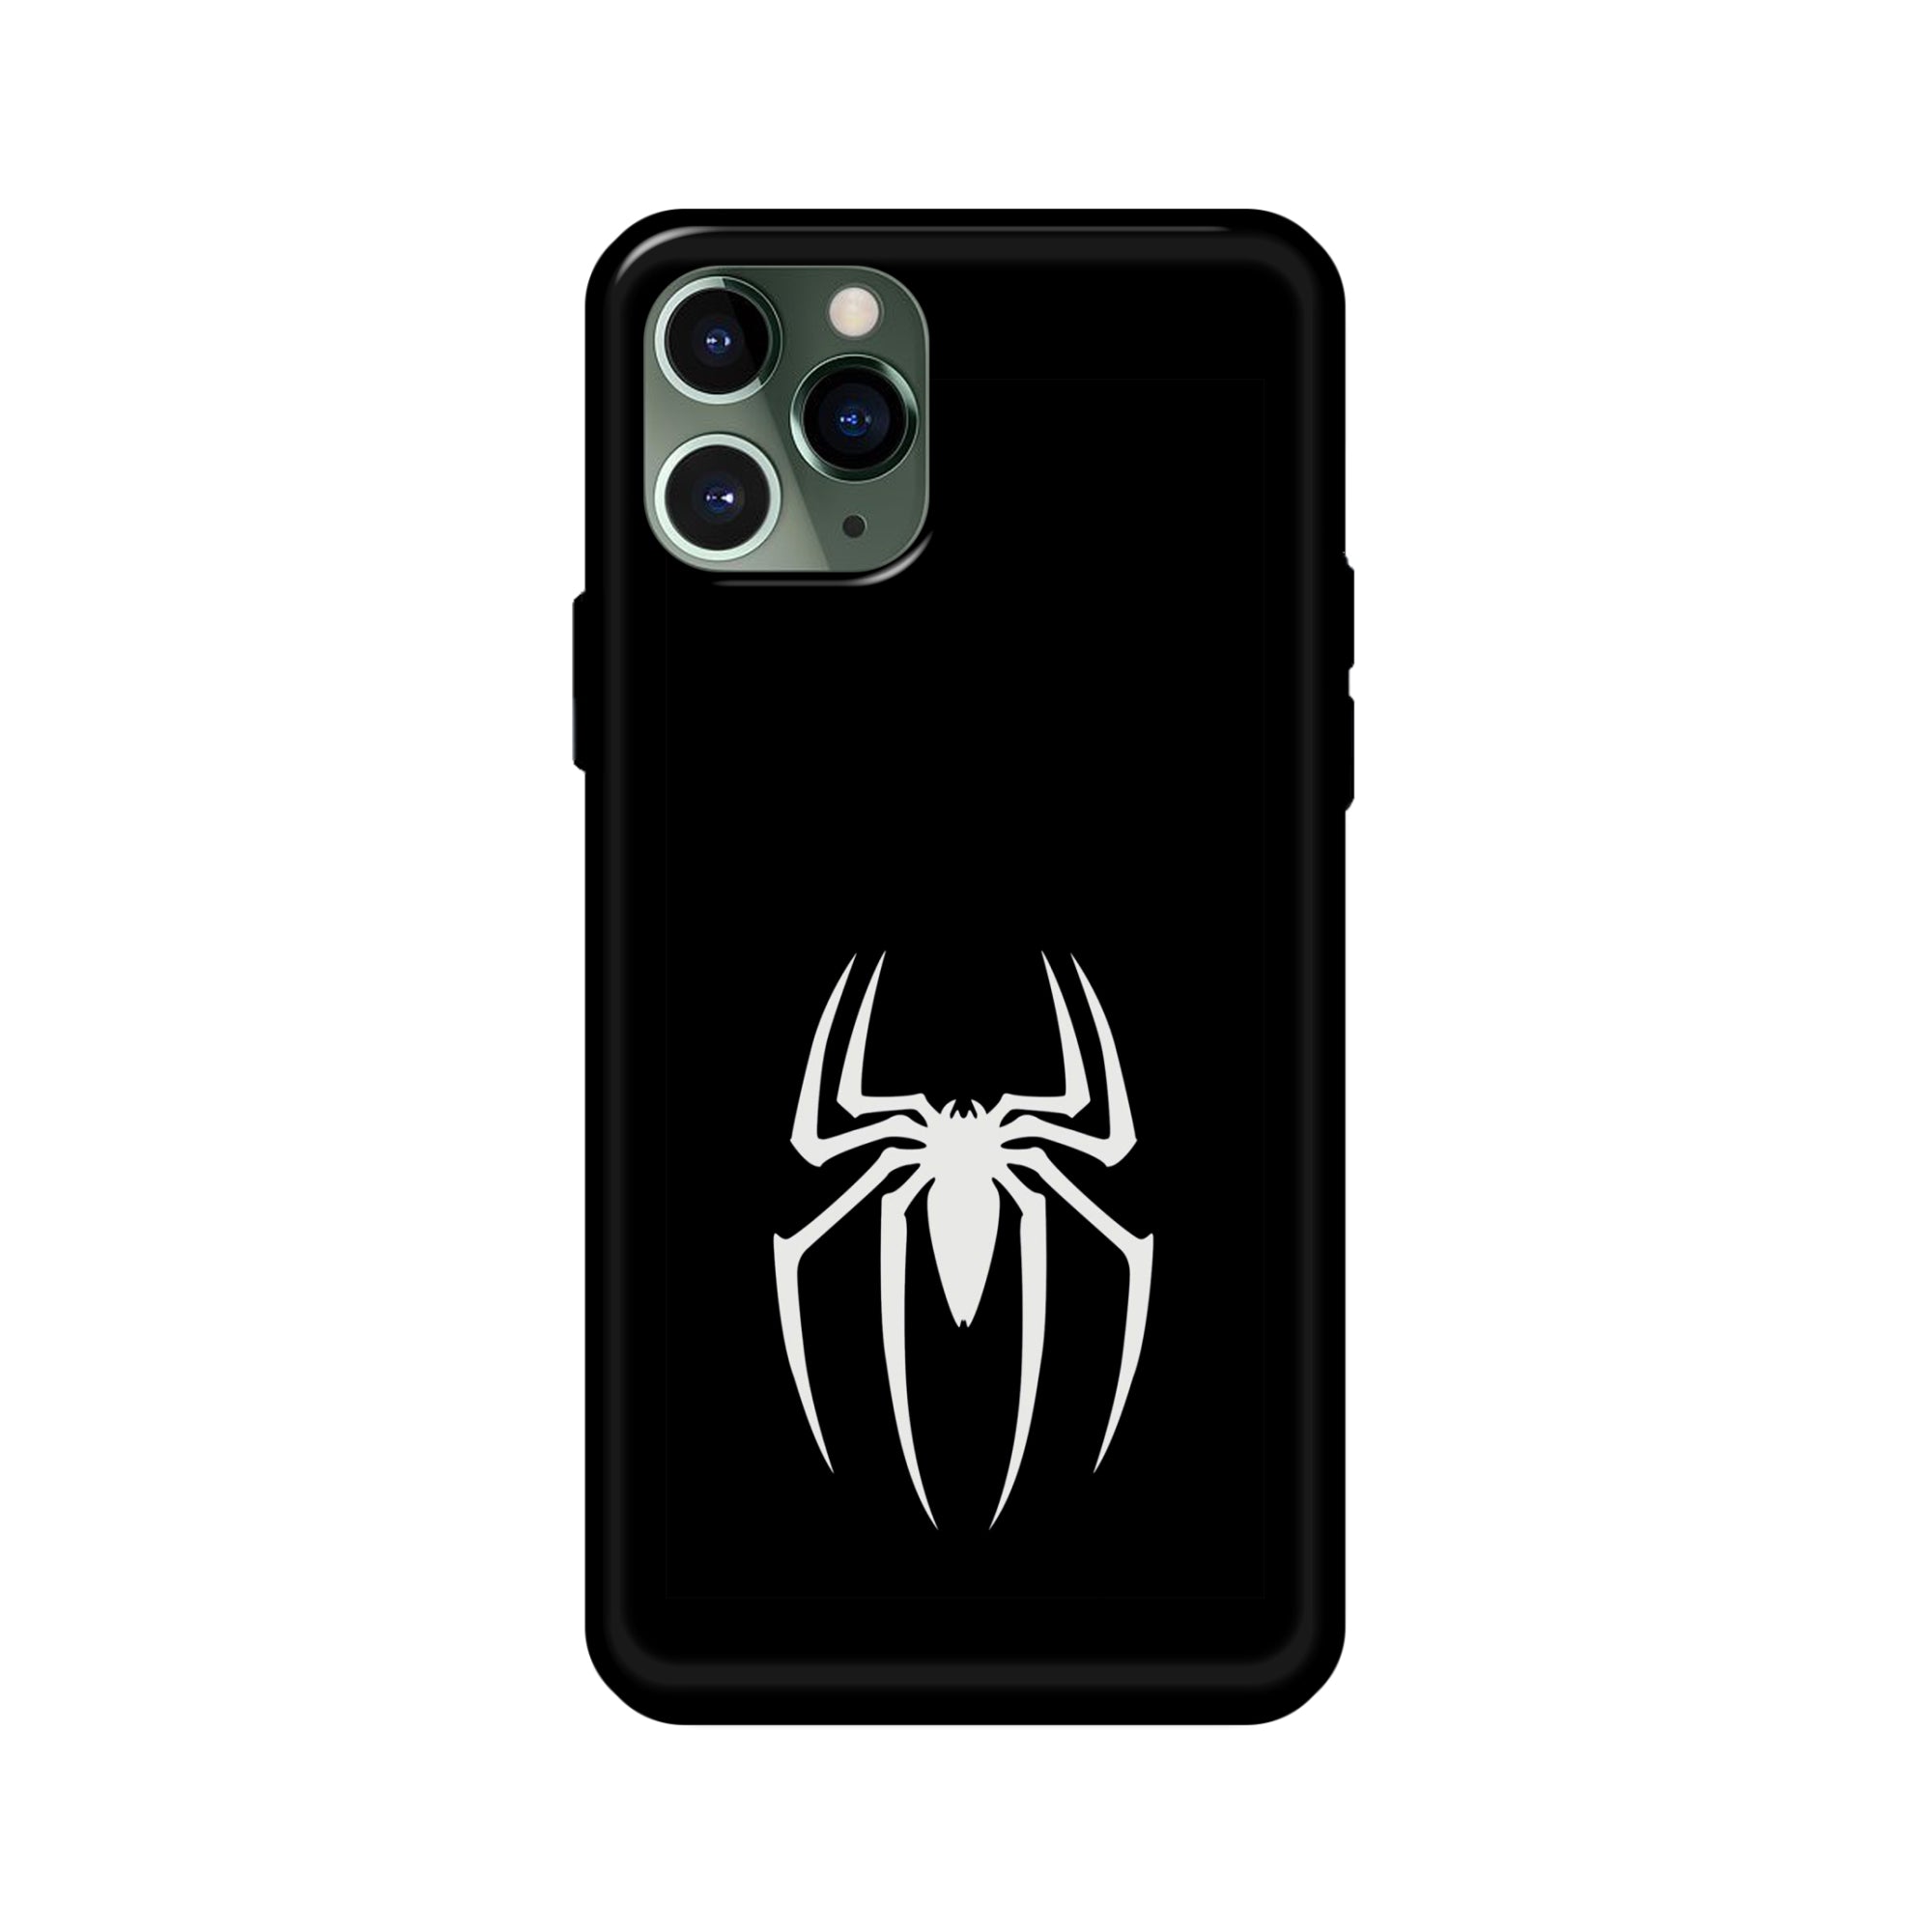 Buy Black Spiderman Logo Glass/Metal Back Mobile Phone Case/Cover For iPhone 11 Pro Online